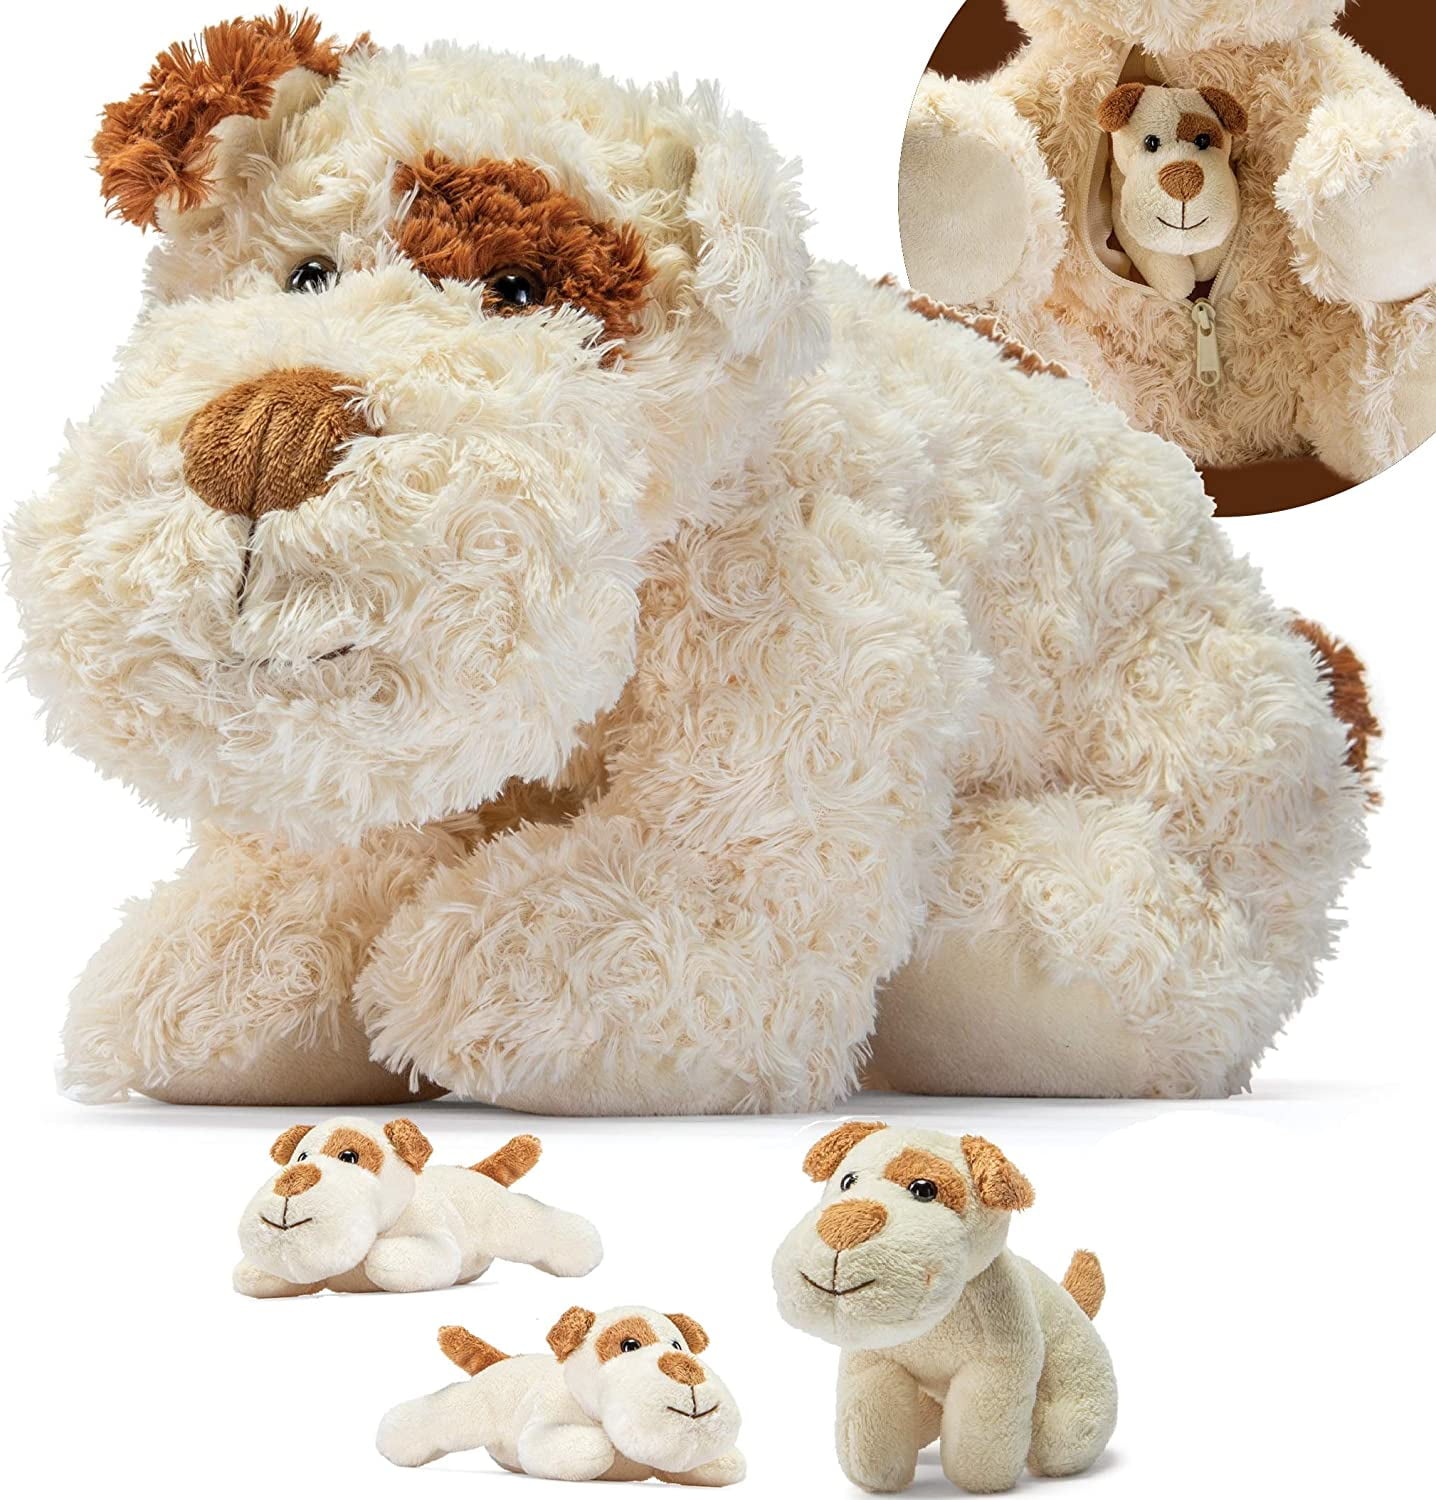 Prextex Plush Puppies Key Chain - Set of 6 Realistic Looking 5-Inch Cute and Cozy Stuffed Animals Little Plush Dogs with Keychain, Kids Unisex, Size: 9.4 x